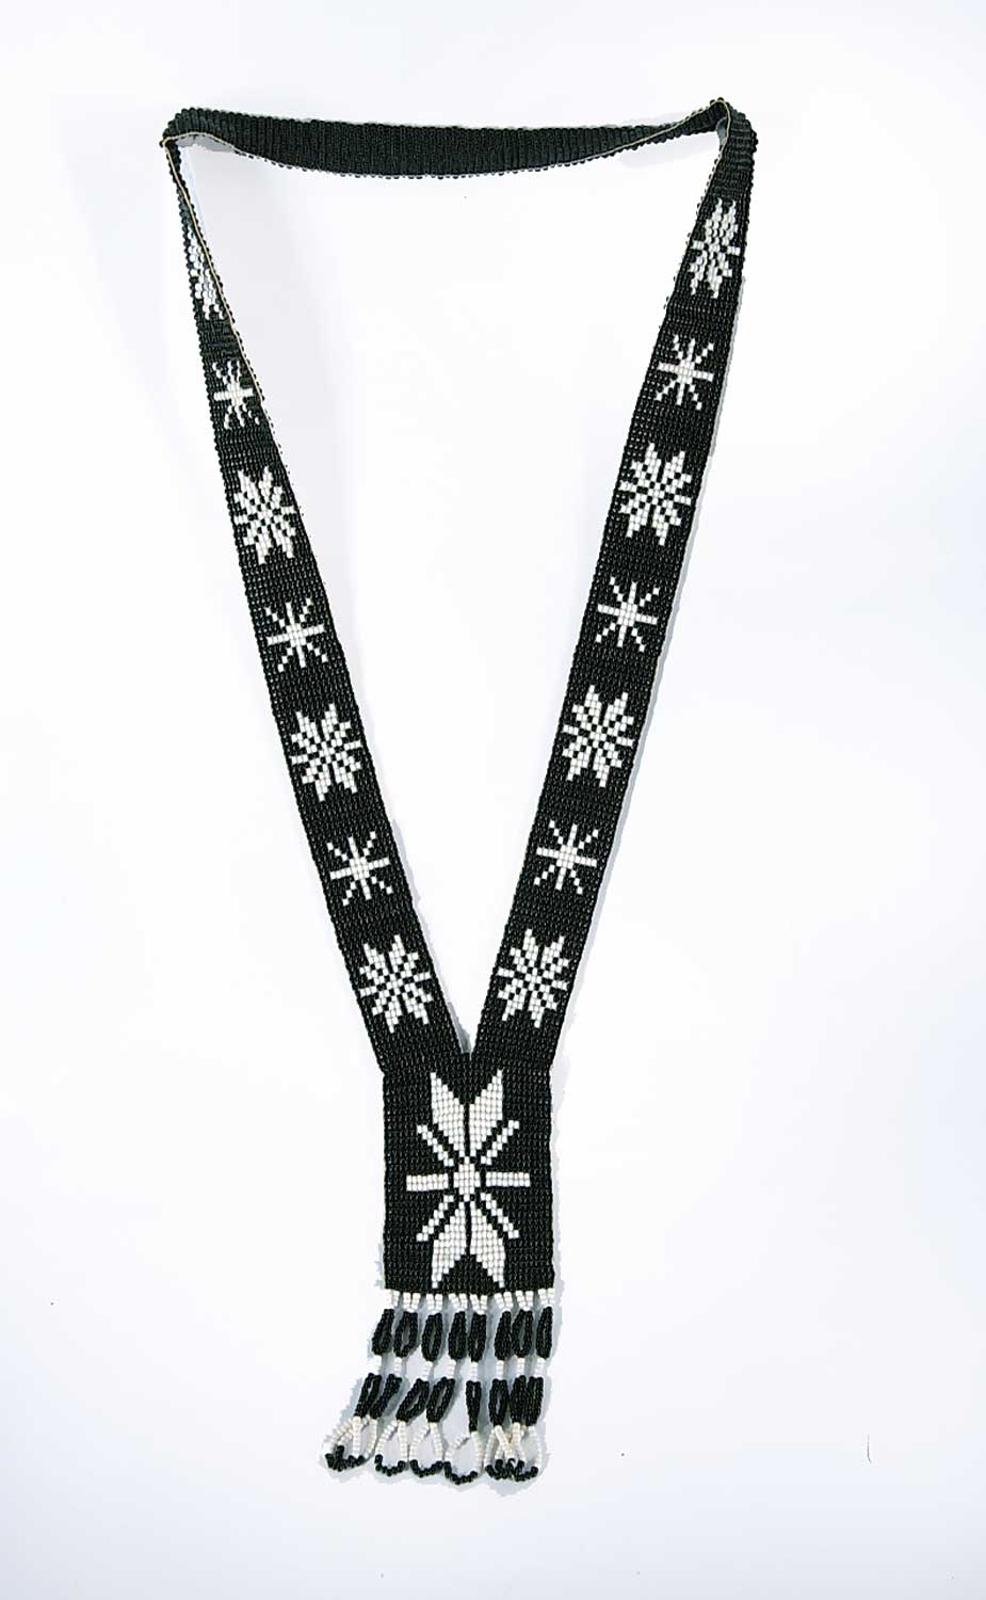 Robert Charles Aller (1922-2008) - Untitled - Black and White Beaded Necklace